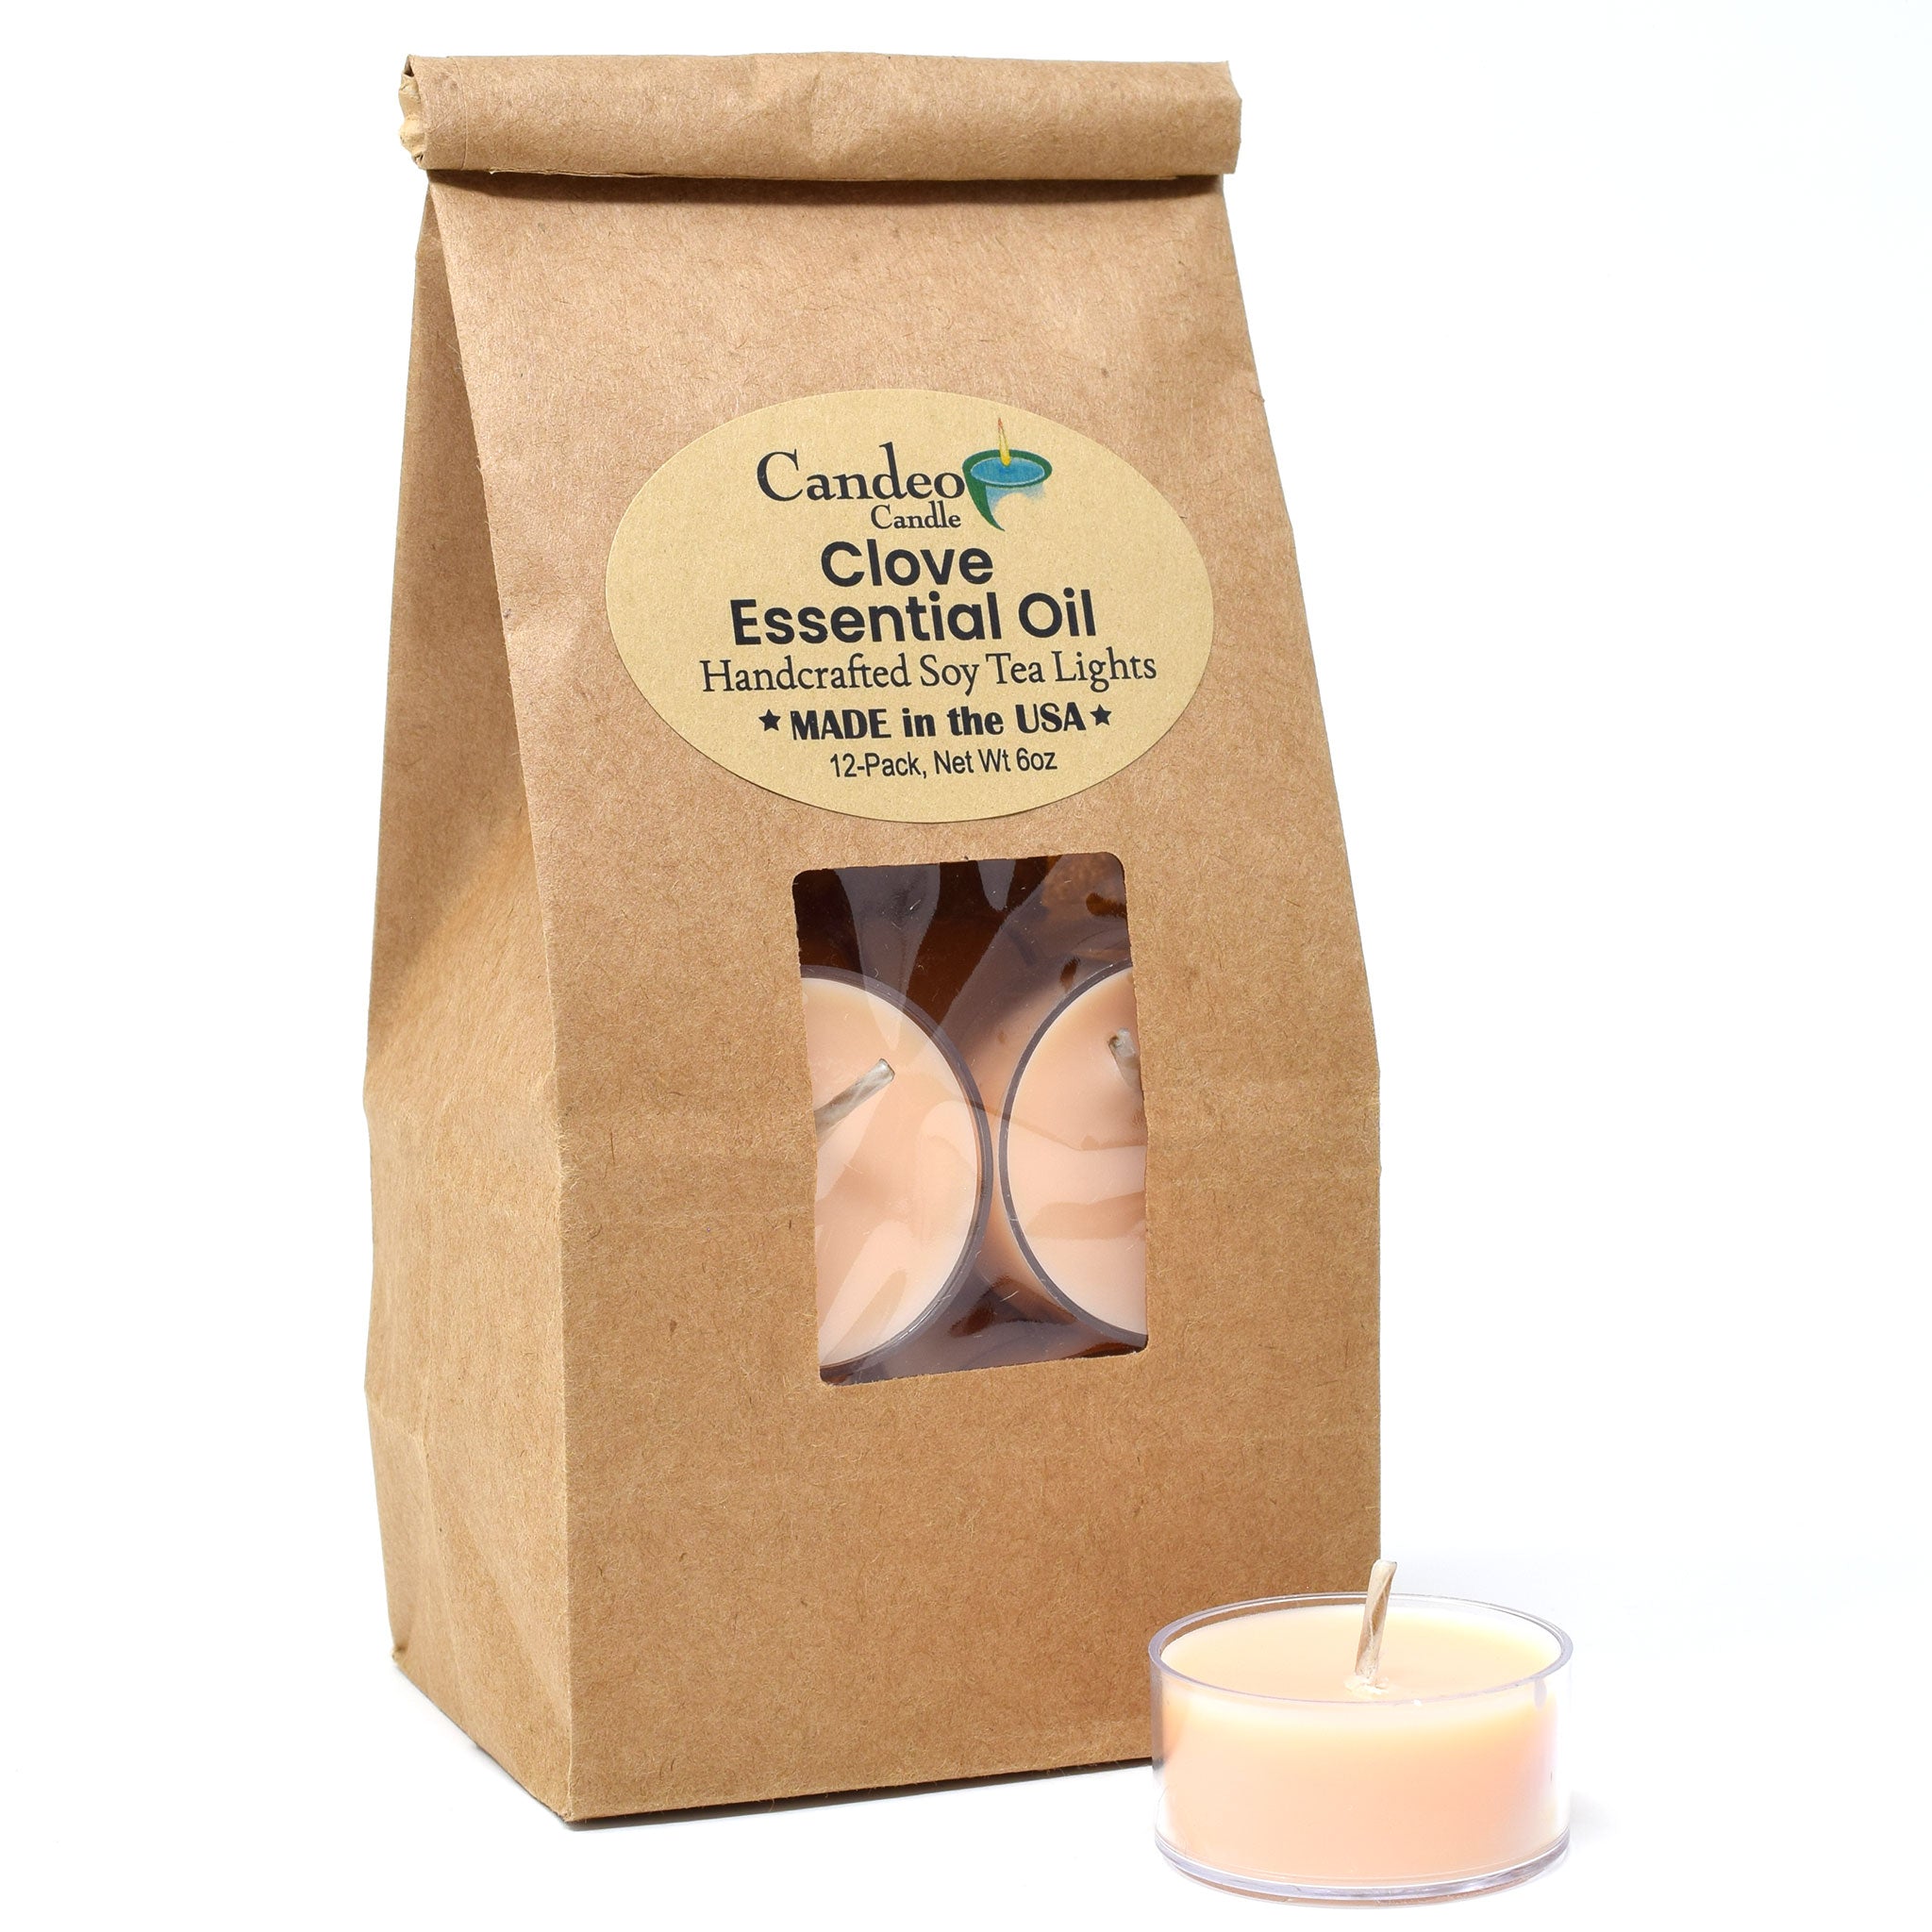 Clove Essential Oil, Soy Tea Light 12-Pack - Candeo Candle